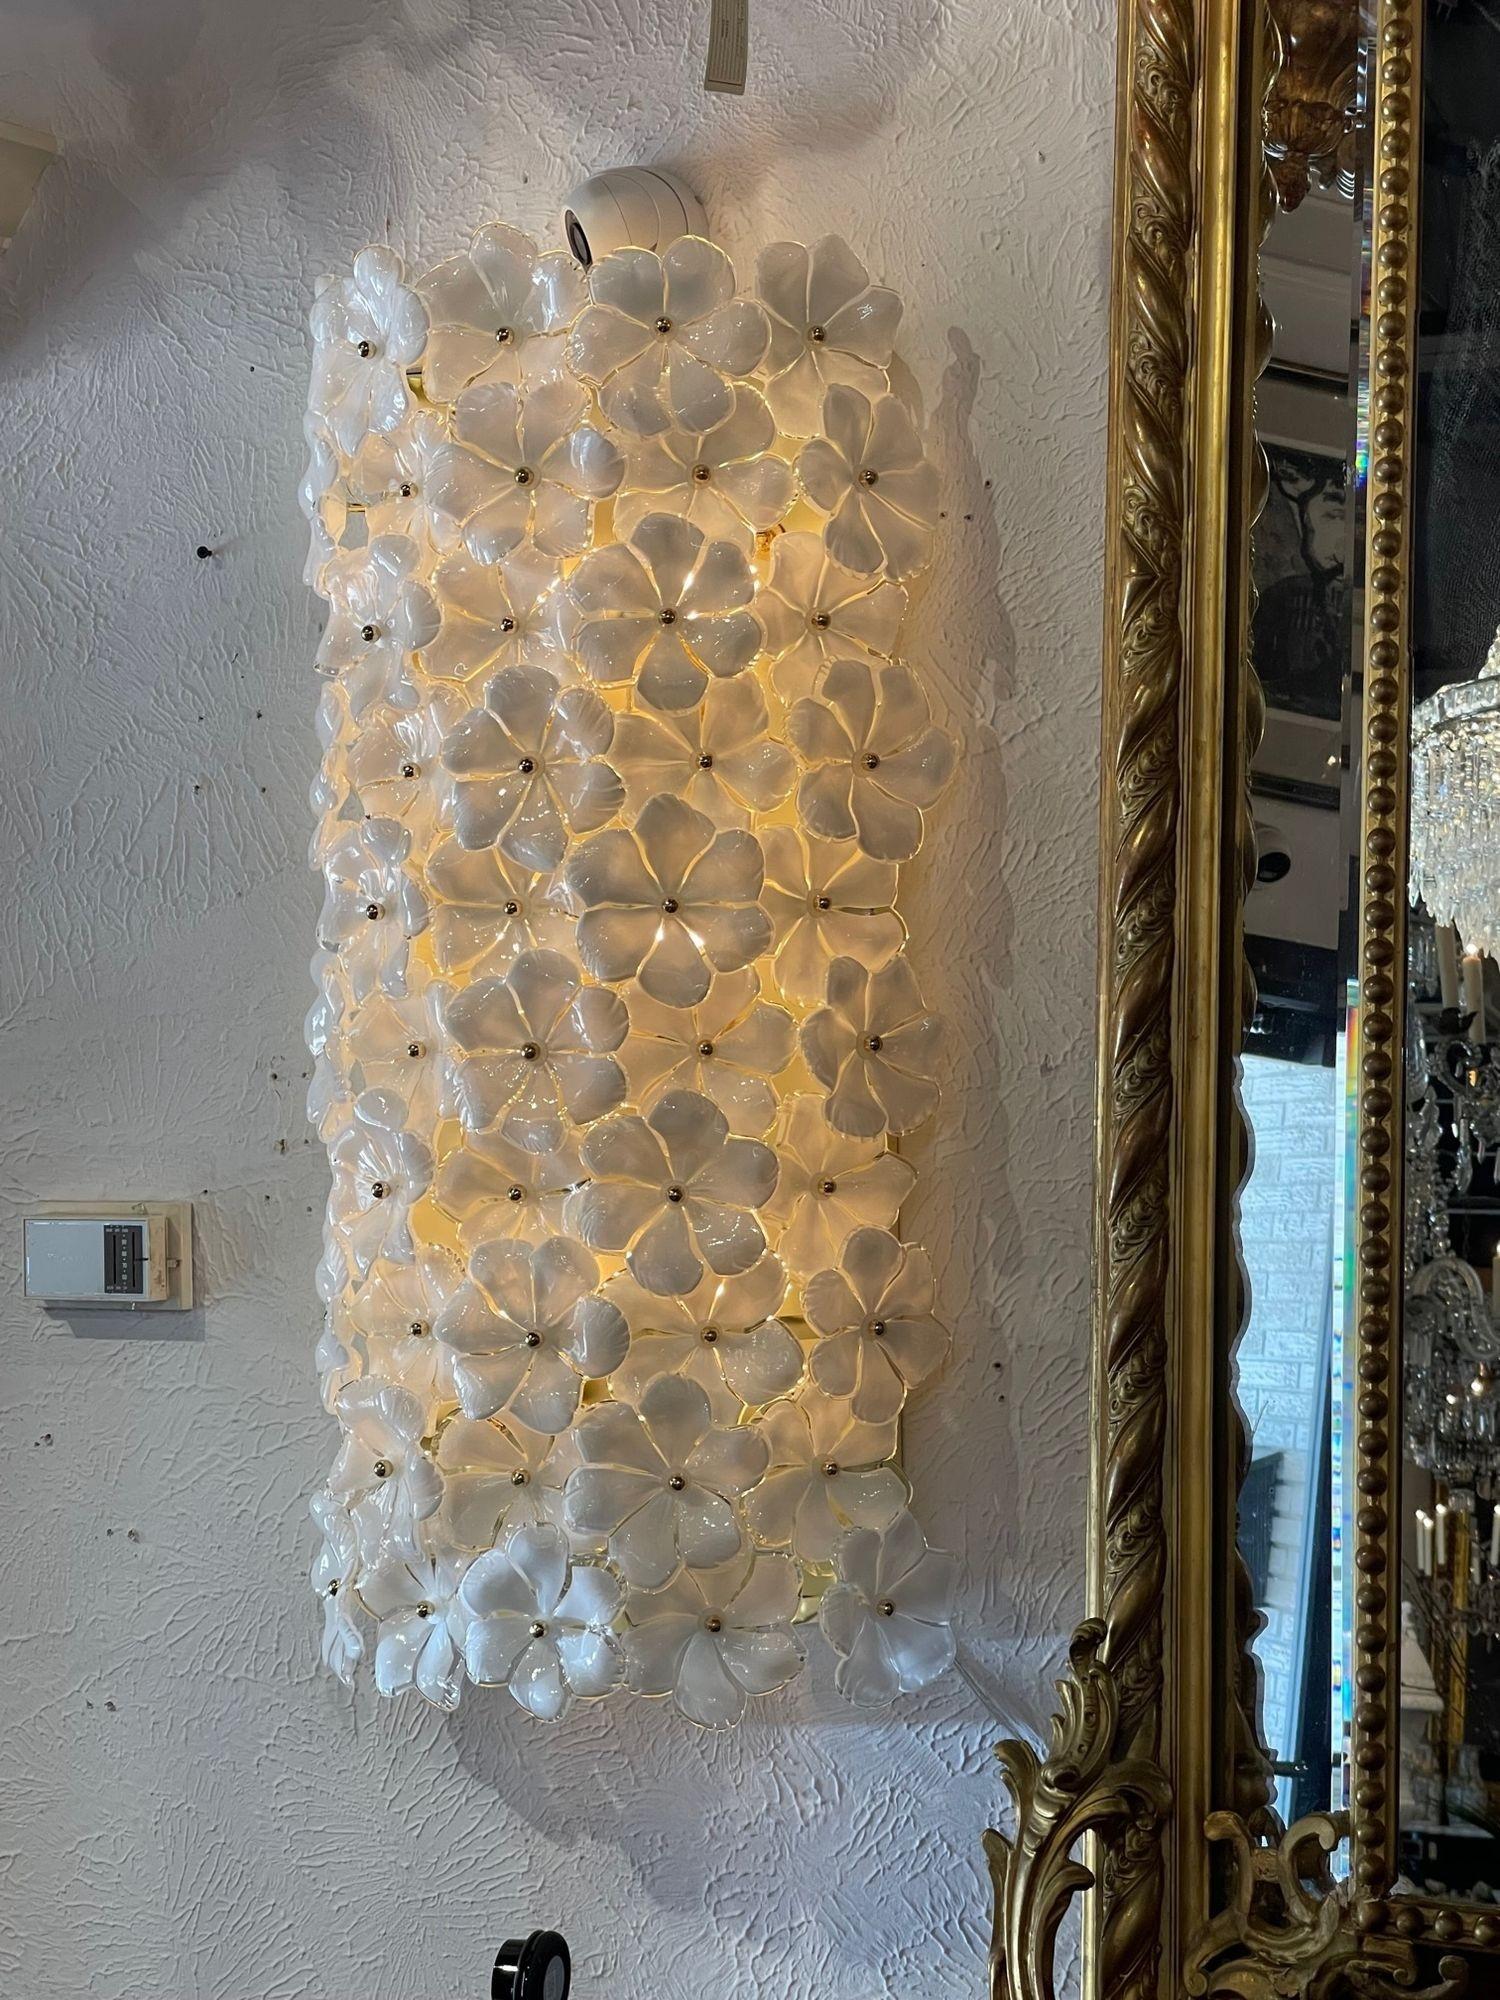 Decorative pair of large scale modern Murano flower sconces. Creates a gorgeous sculptural look and very fine quality as well. These are exquisite!!